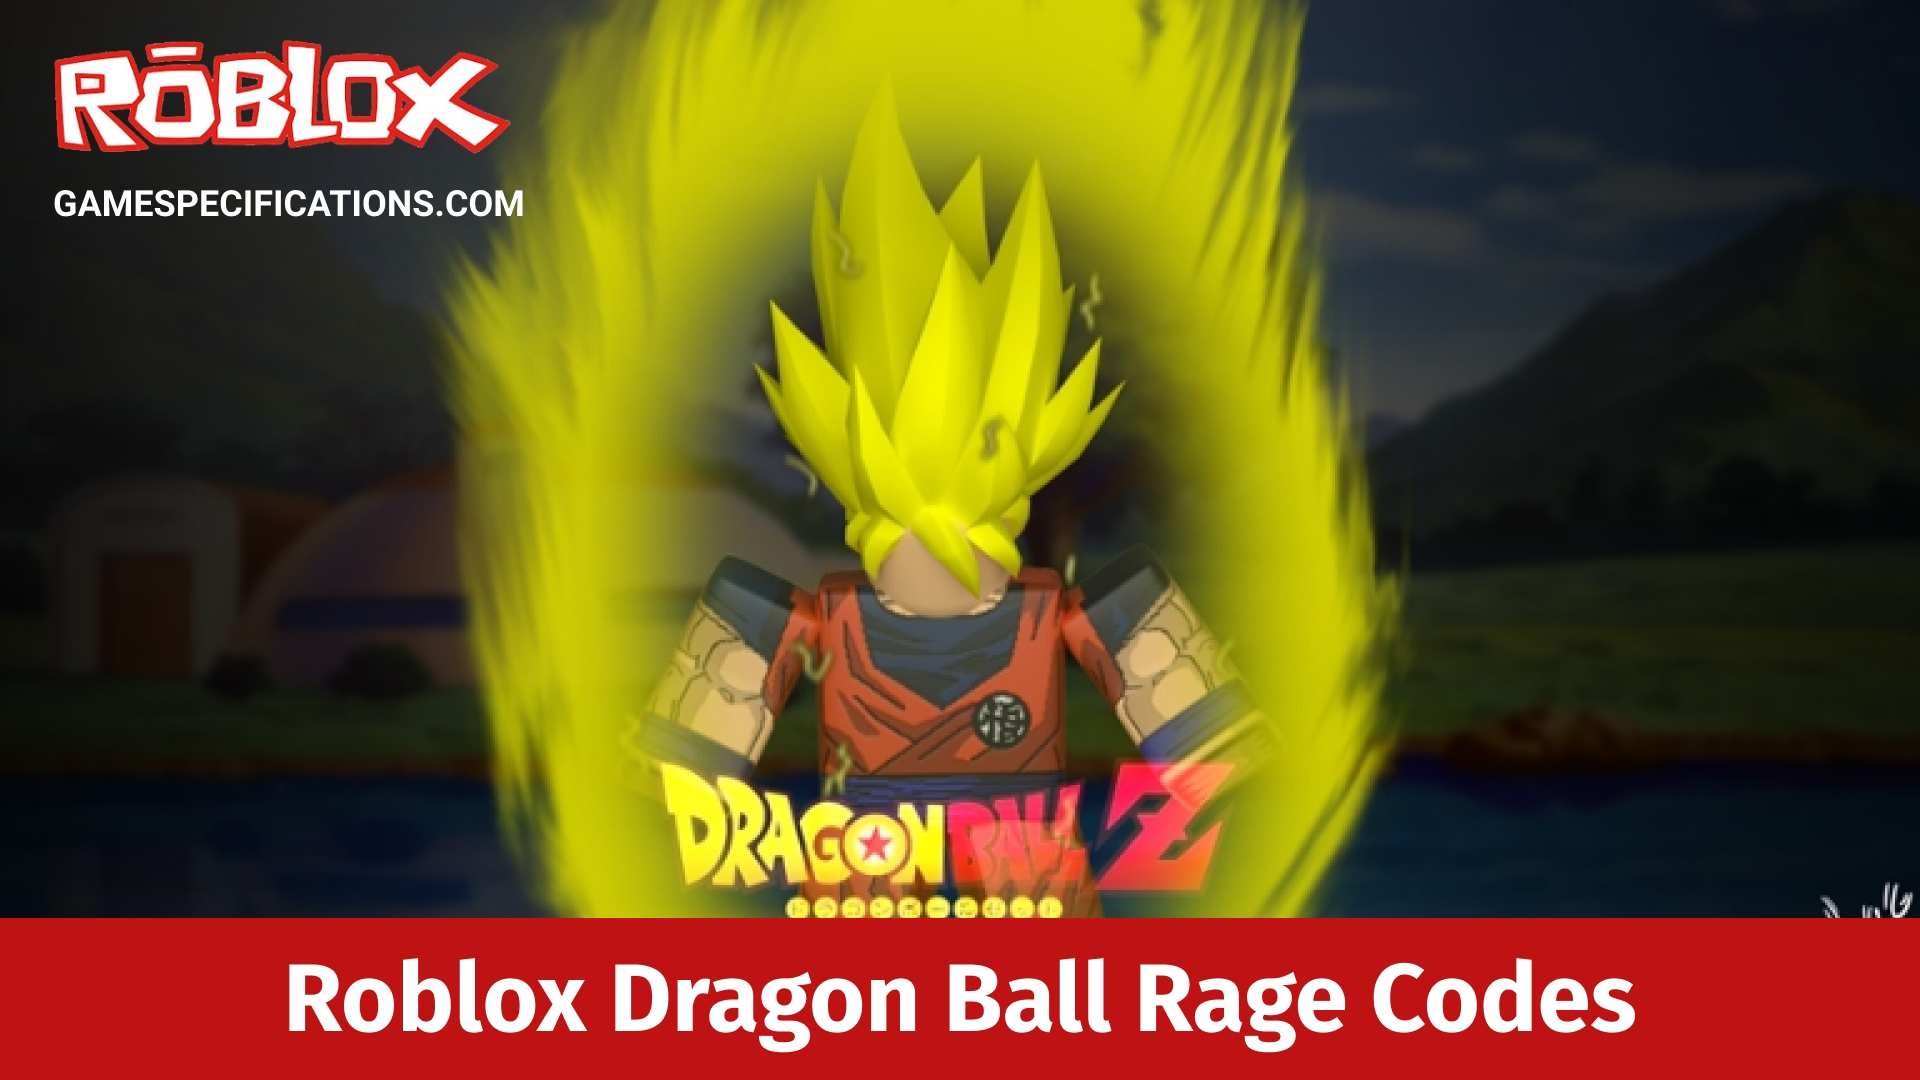 Roblox Dragon Ball Rage Codes July 2021 Game Specifications - dragon rage codes roblox